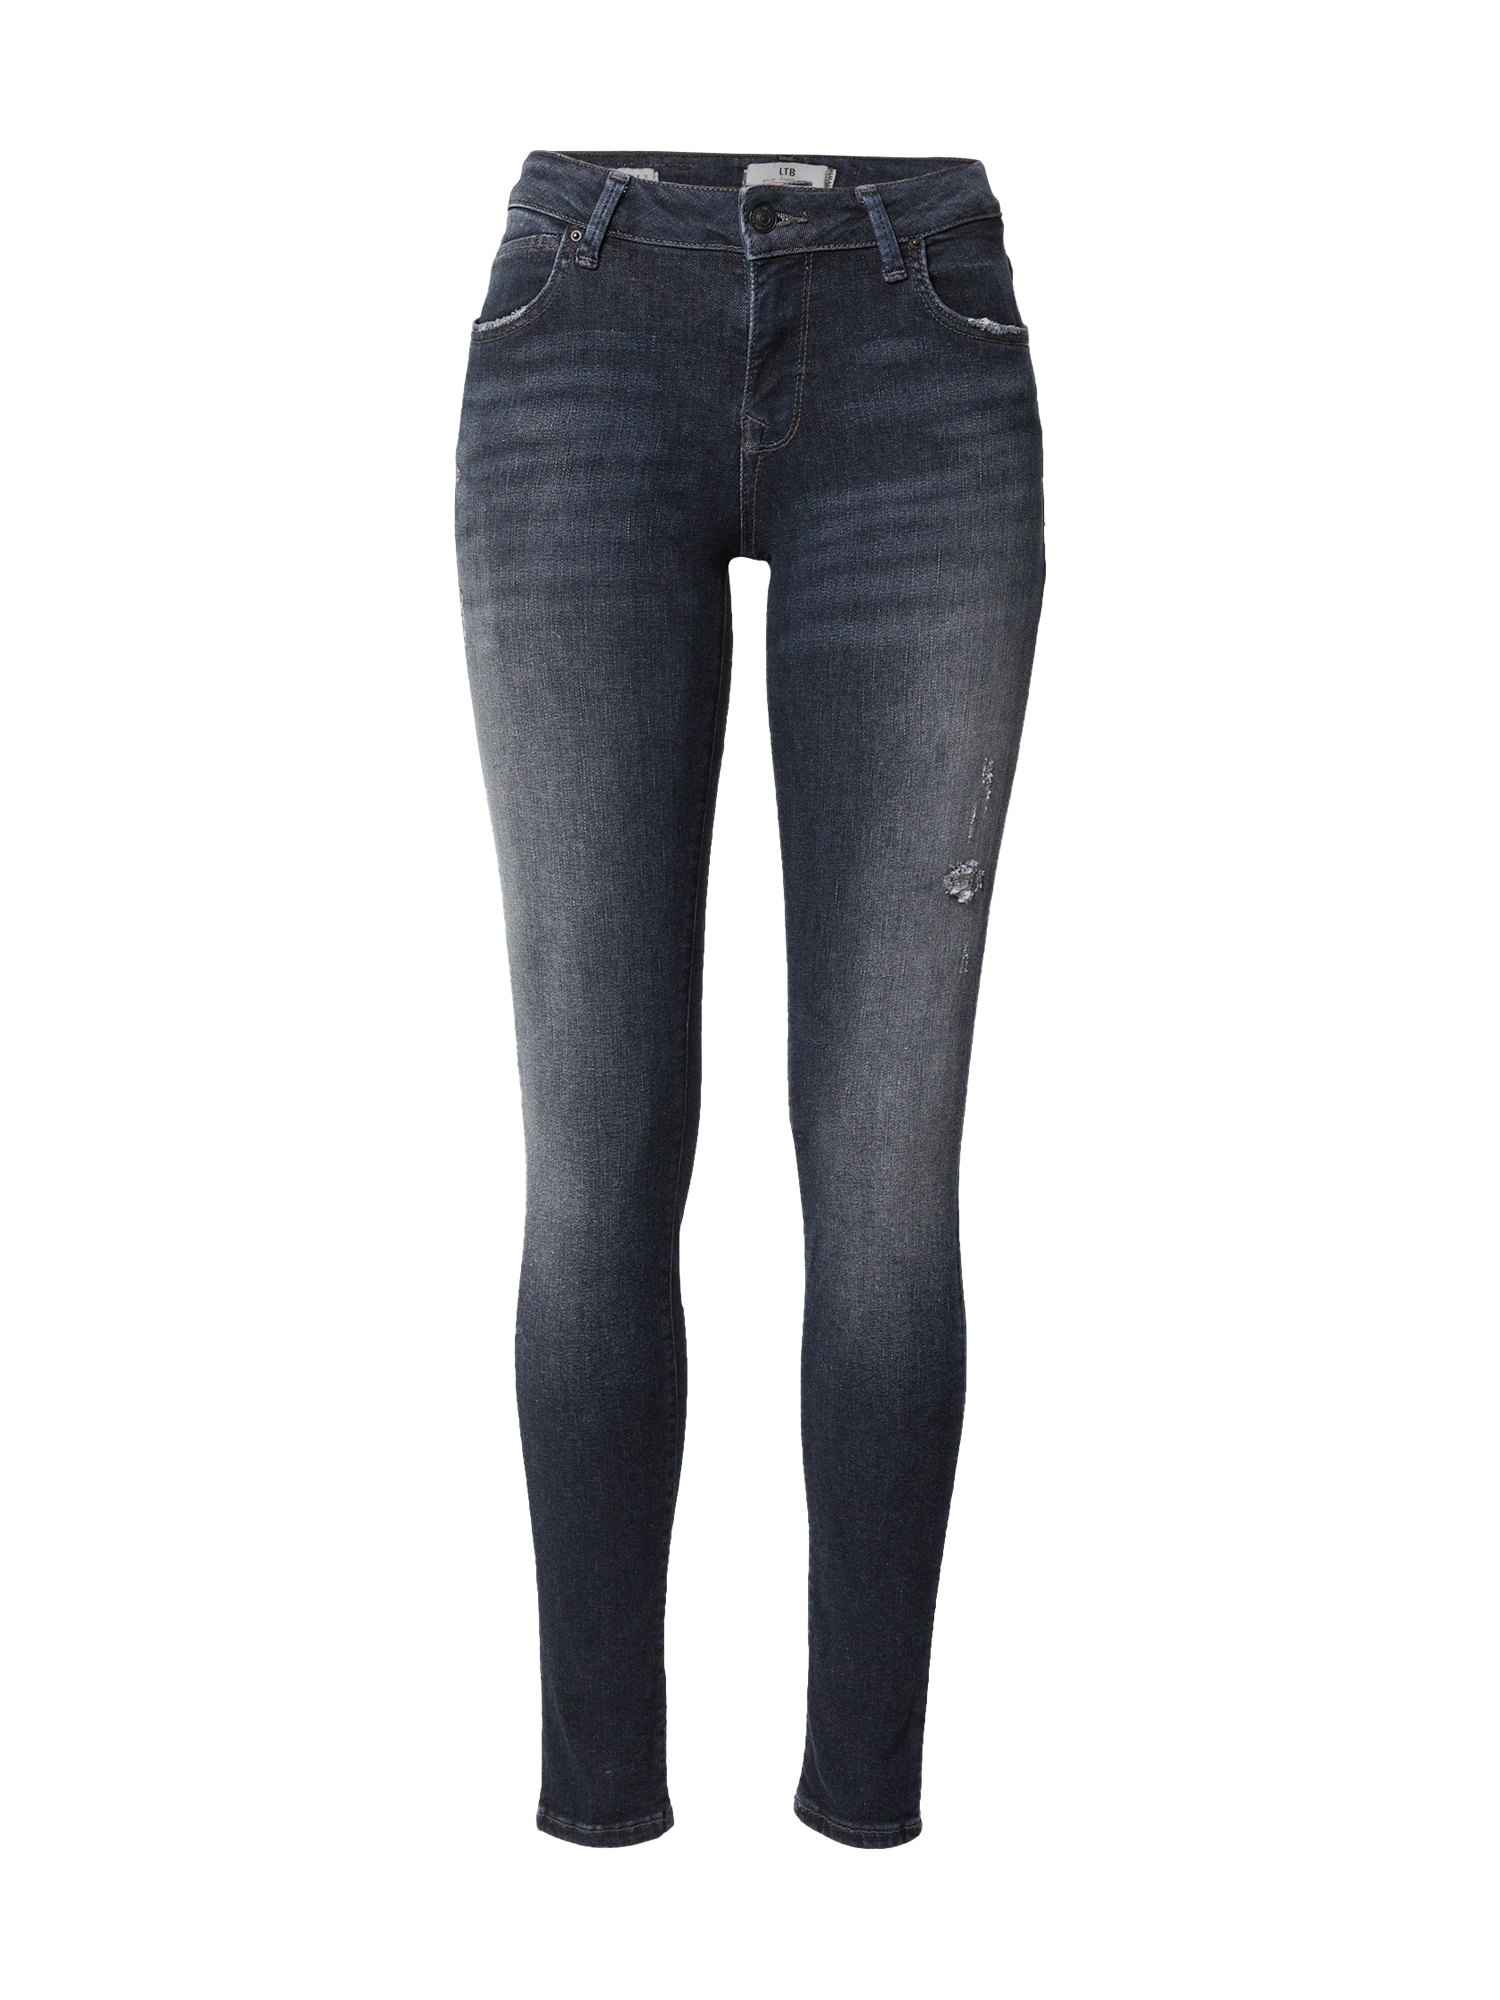 Jeans Donna LTB Jeans Nicole X in Blu Scuro 